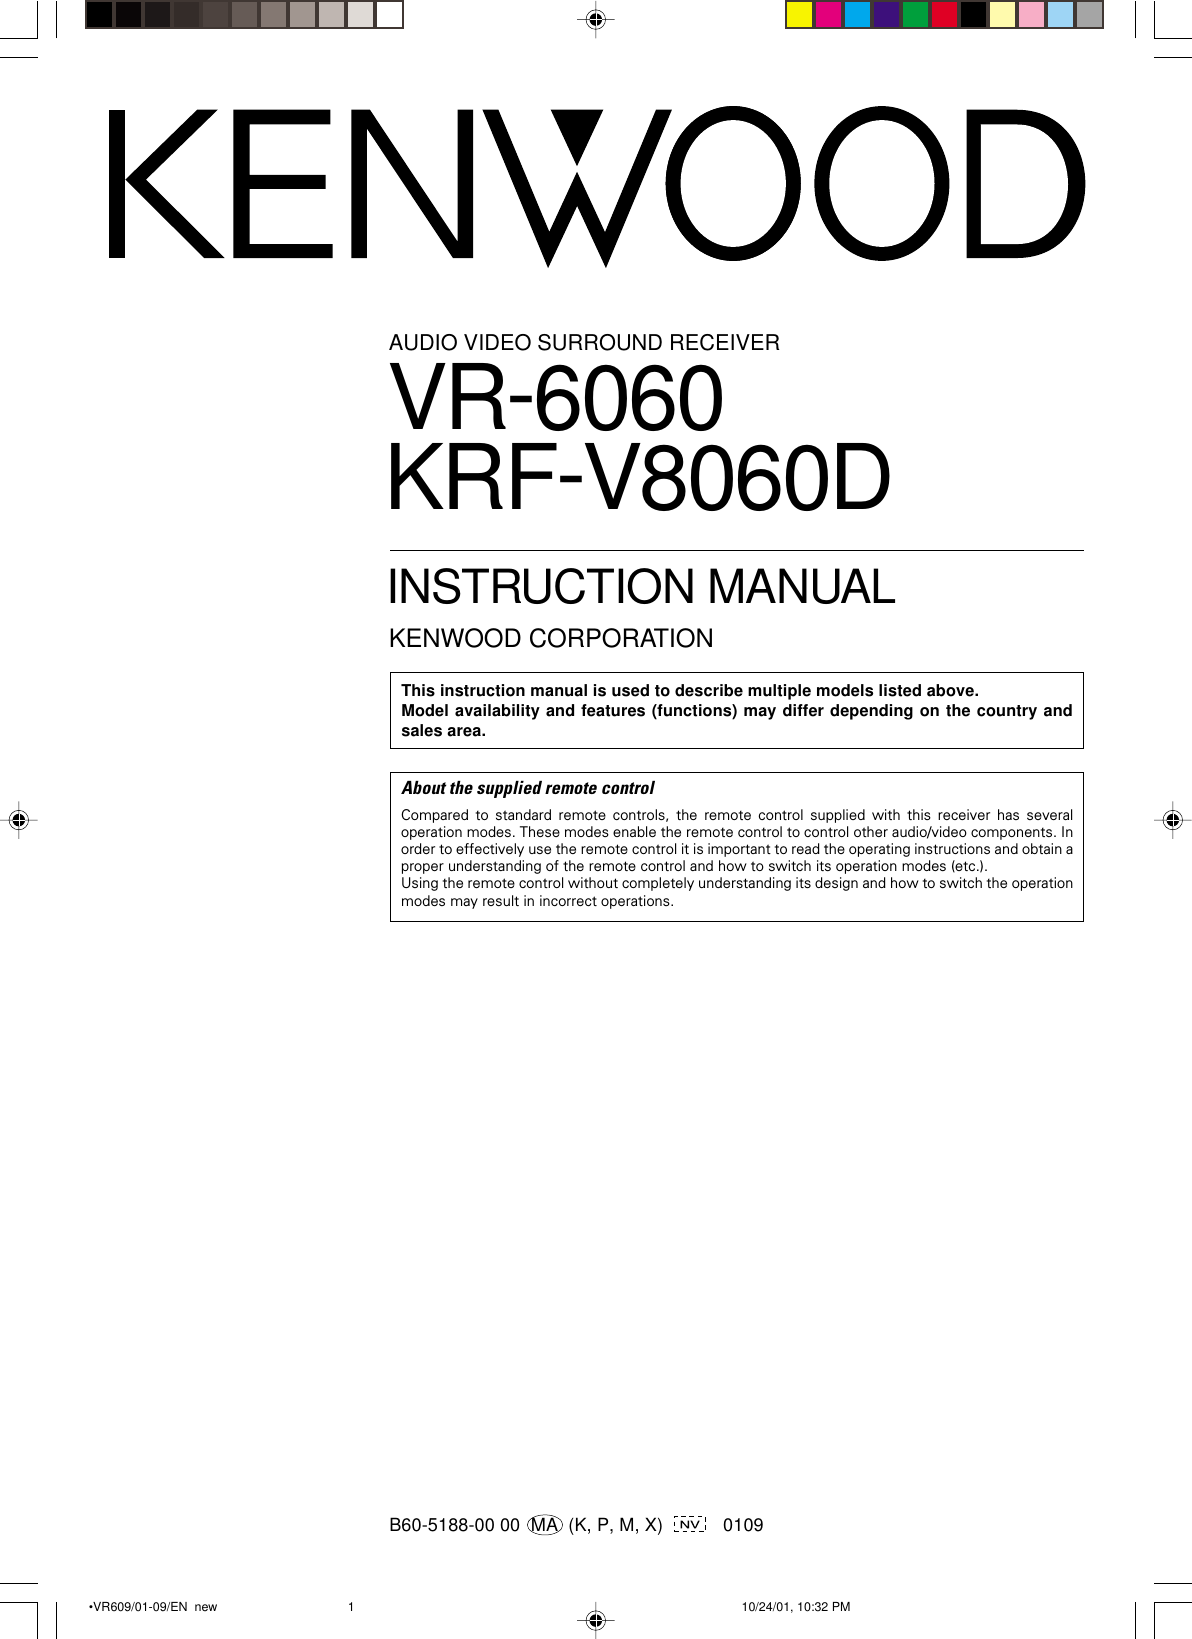 B60-5188-00 00  MA  (K, P, M, X)      0109AUDIO VIDEO SURROUND RECEIVERVR-6060KRF-V8060DINSTRUCTION MANUALKENWOOD CORPORATIONThis instruction manual is used to describe multiple models listed above.Model availability and features (functions) may differ depending on the country andsales area.About the supplied remote controlCompared to standard remote controls, the remote control supplied with this receiver has severaloperation modes. These modes enable the remote control to control other audio/video components. Inorder to effectively use the remote control it is important to read the operating instructions and obtain aproper understanding of the remote control and how to switch its operation modes (etc.).Using the remote control without completely understanding its design and how to switch the operationmodes may result in incorrect operations. •VR609/01-09/EN  new 10/24/01, 10:32 PM1